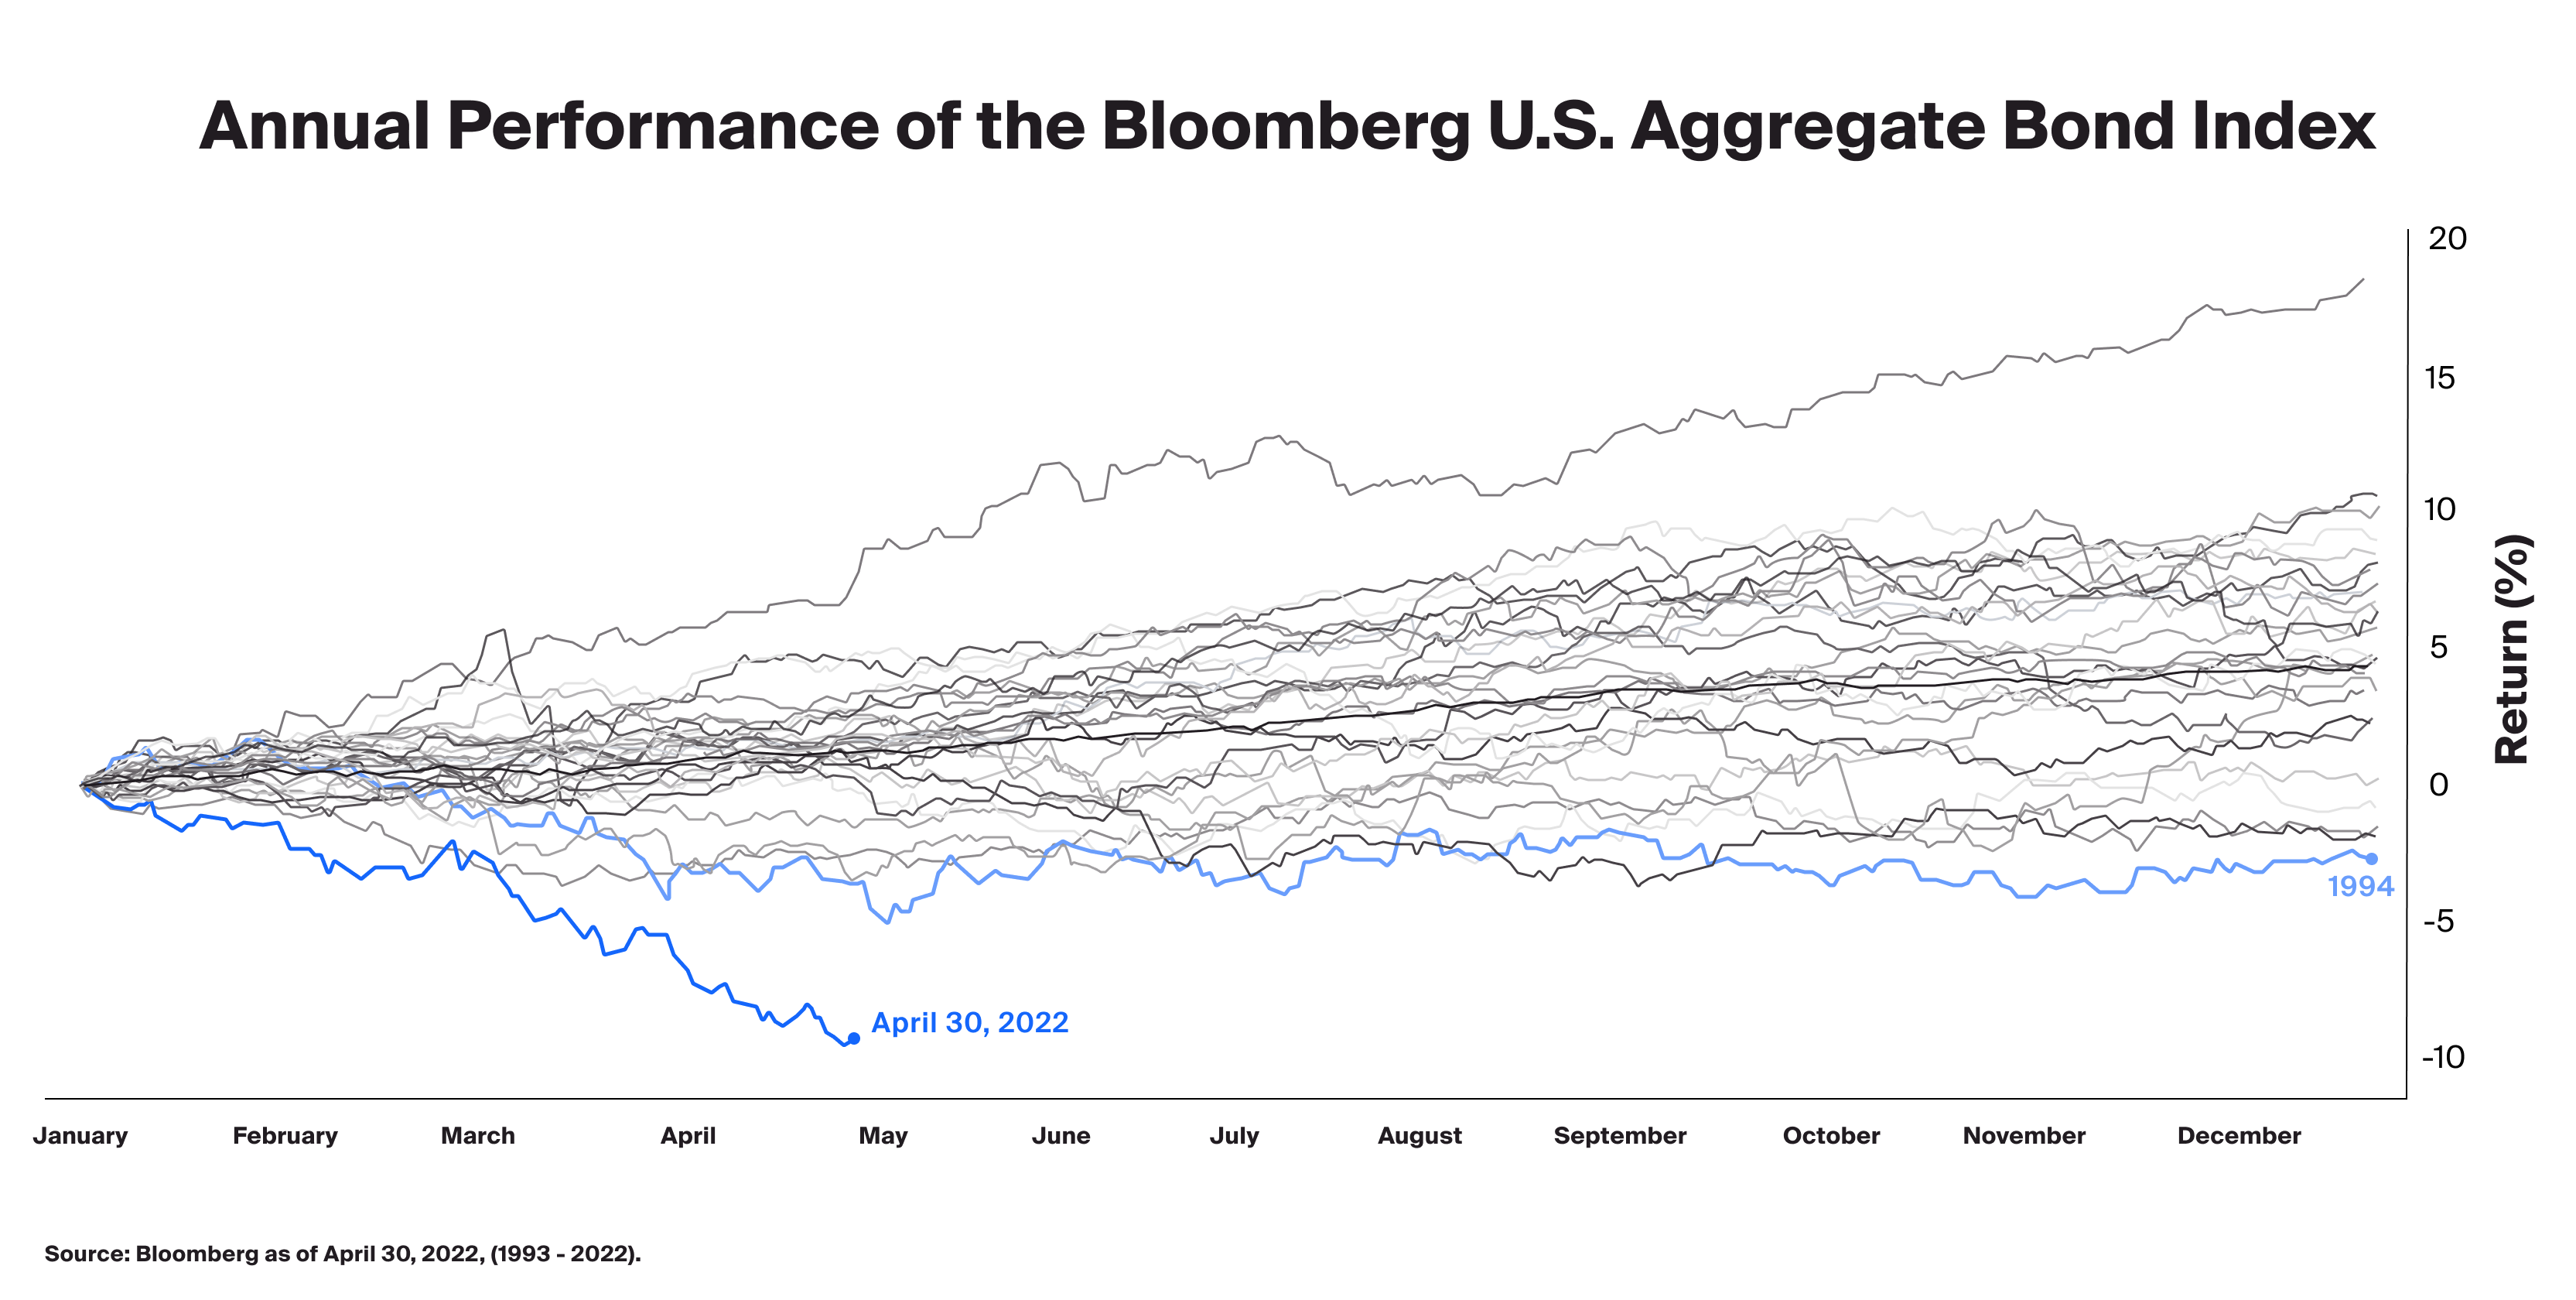 Annual Performance of the Bloomberg U.S. Aggregate Bond Index